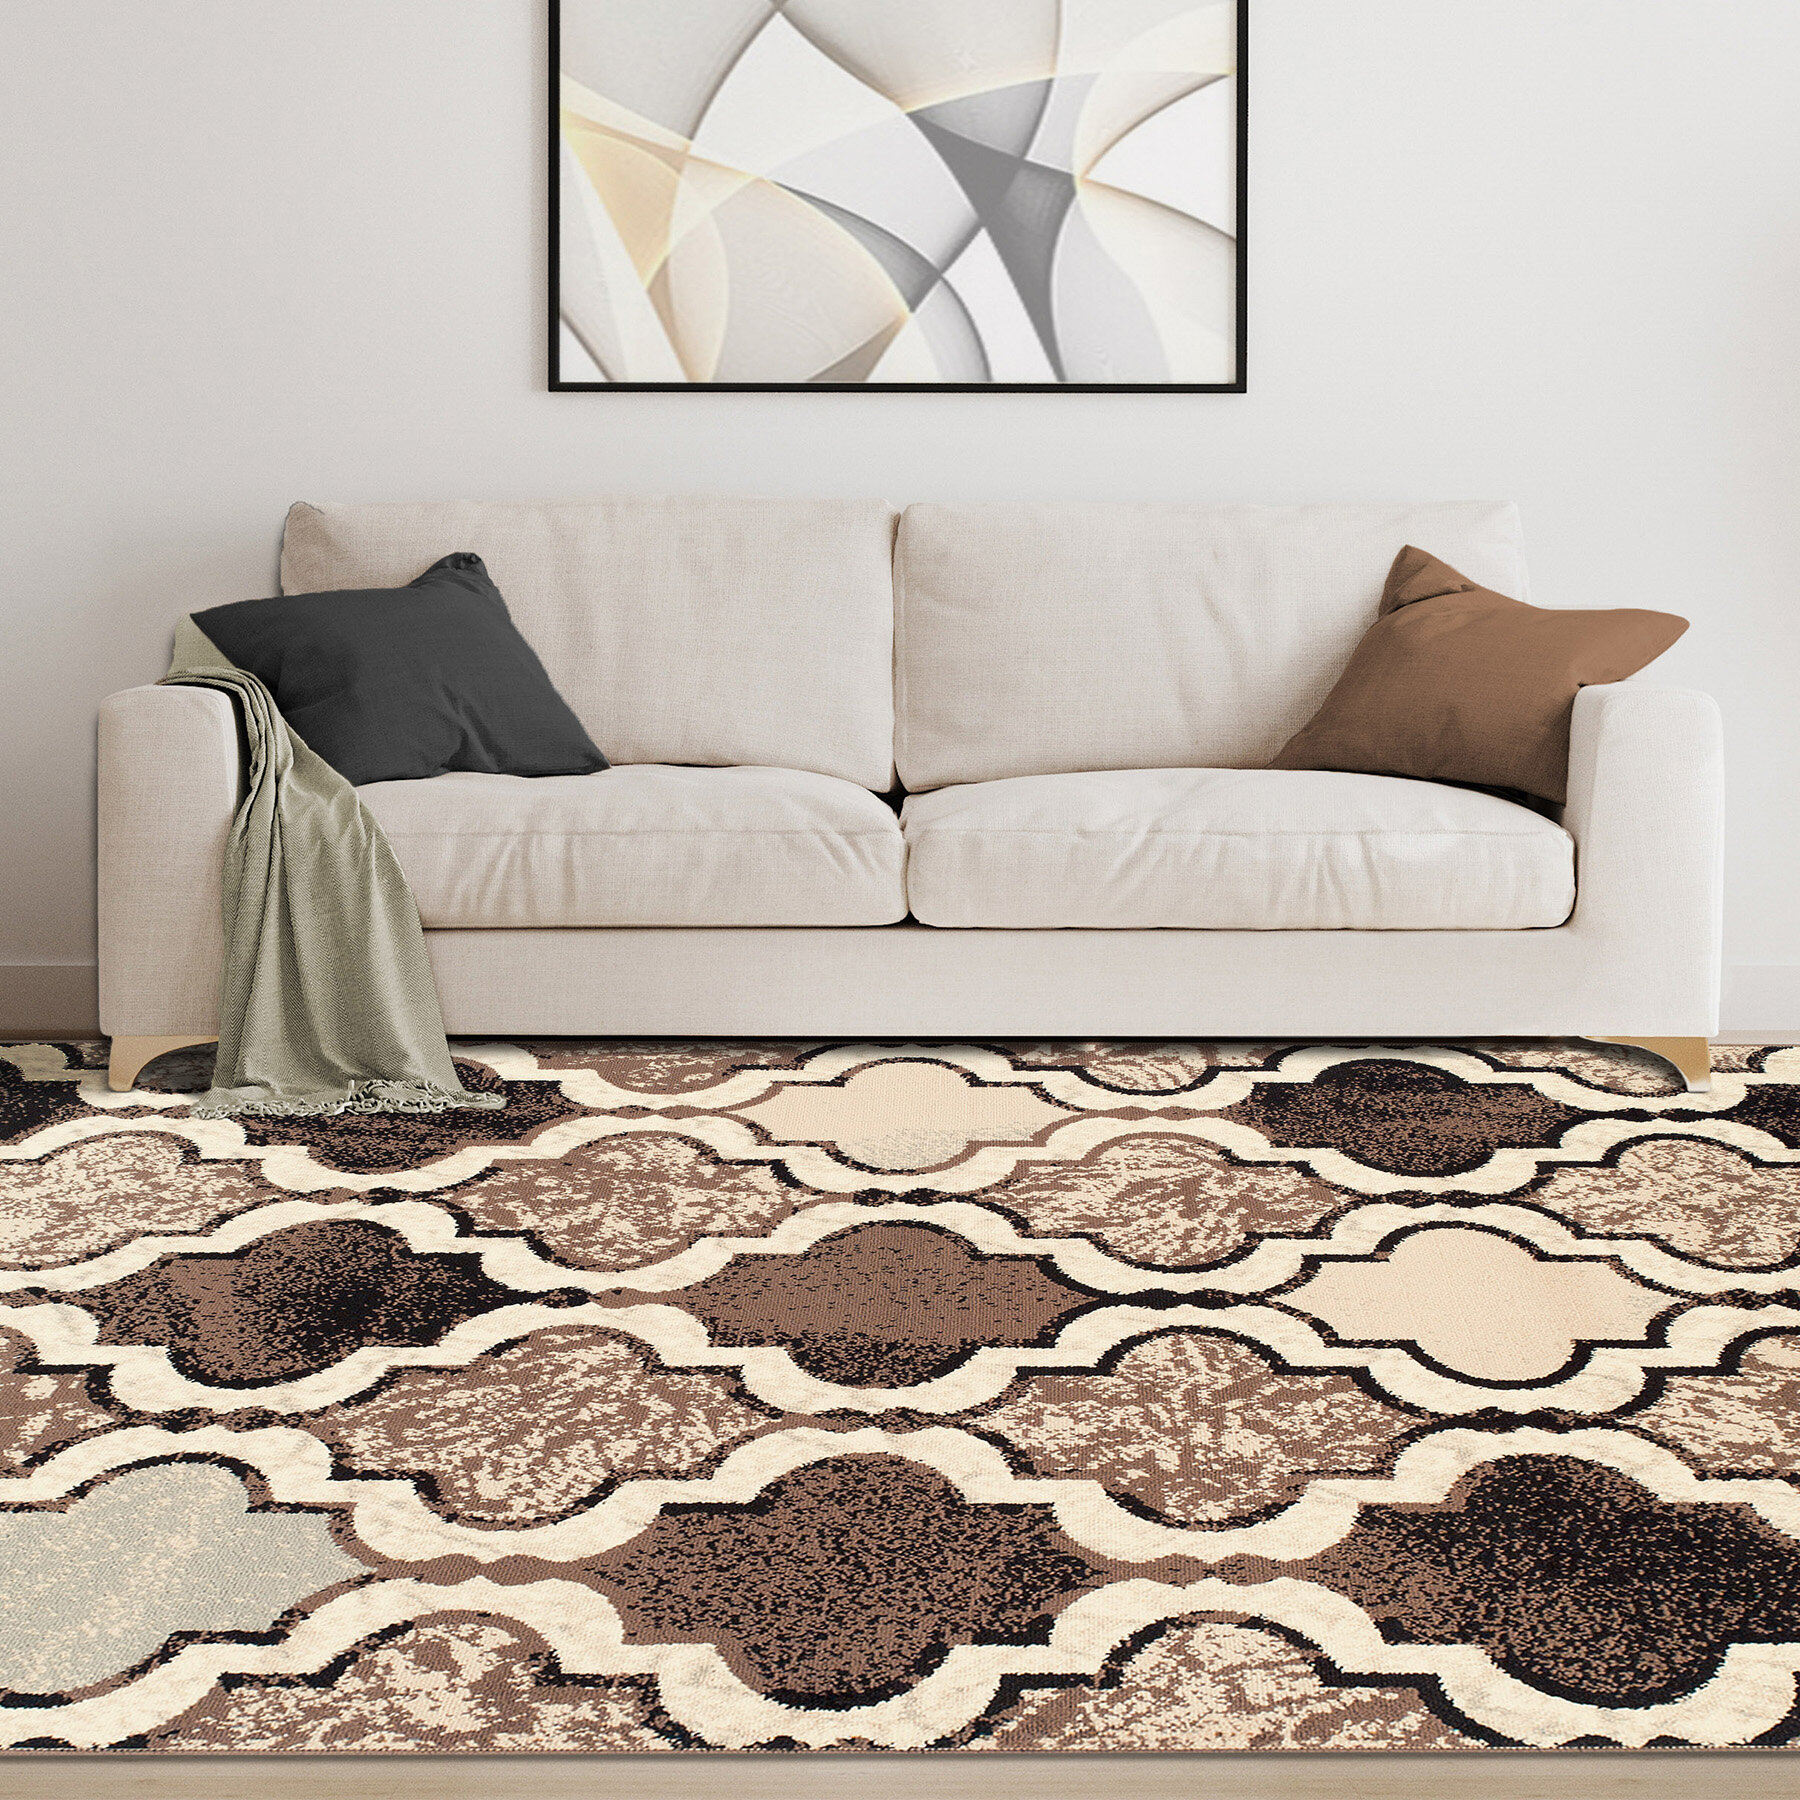 QUALITY MODERN GEOMETRIC FLORAL LOW COST MULTI 12 MM THICK SOFT LARGE SALE RUGS 